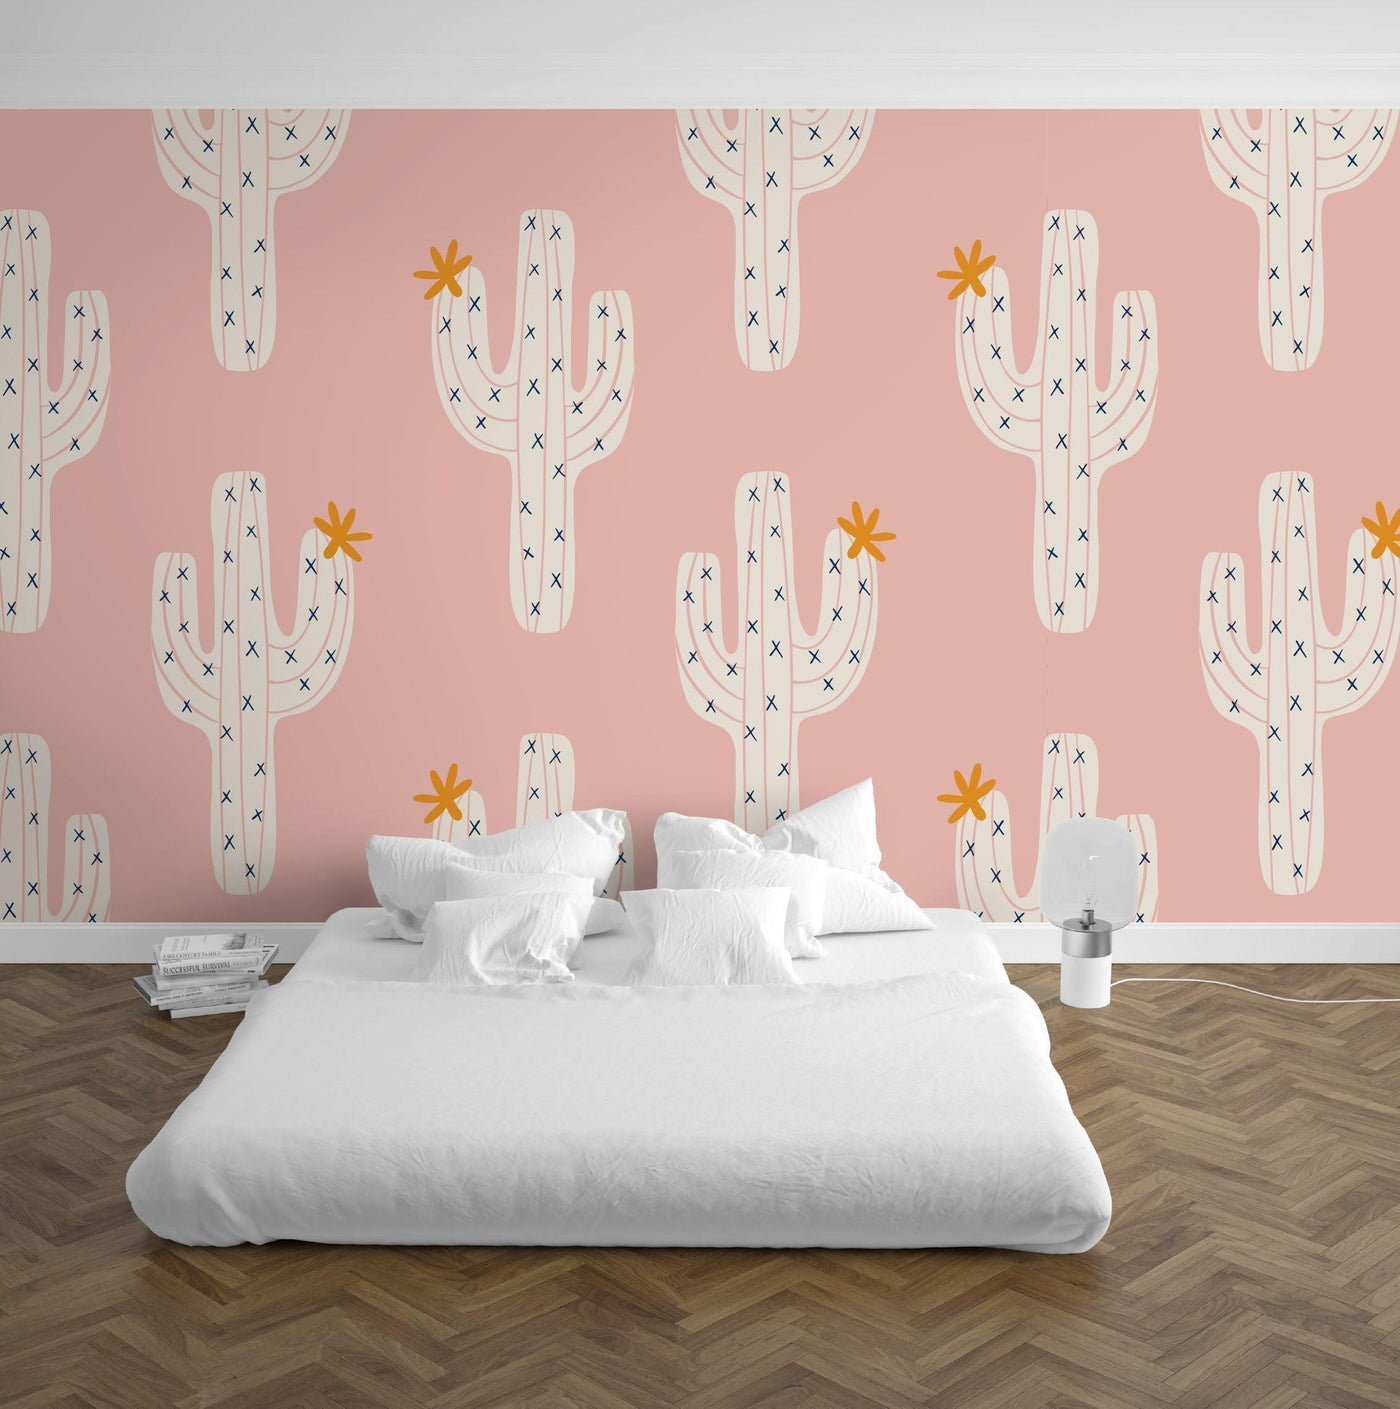 Pink Pastel Cactus Mural Wallpaper (m²)-Wall Decor-CACTUS WALLPAPERS, MURALS, MURALS / WALLPAPERS, NATURE WALL ART, NON-WOVEN WALLPAPER-Forest Homes-Nature inspired decor-Nature decor